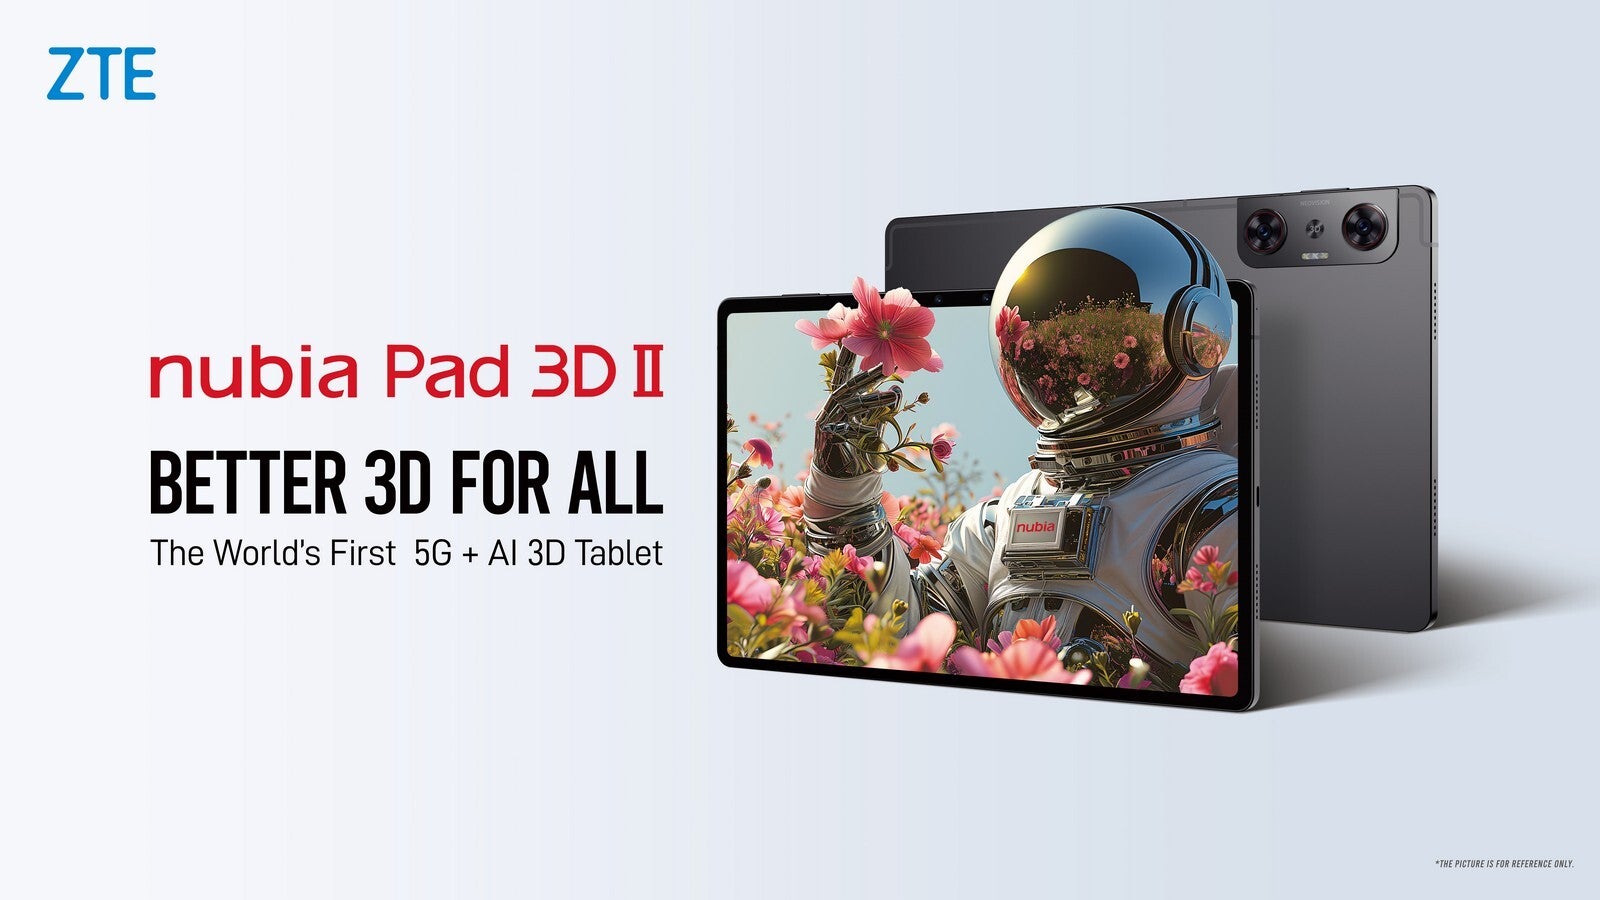 ZTE nubia Pad 3D II employs AI for glasses-free 3D experience and smooth 2D conversion